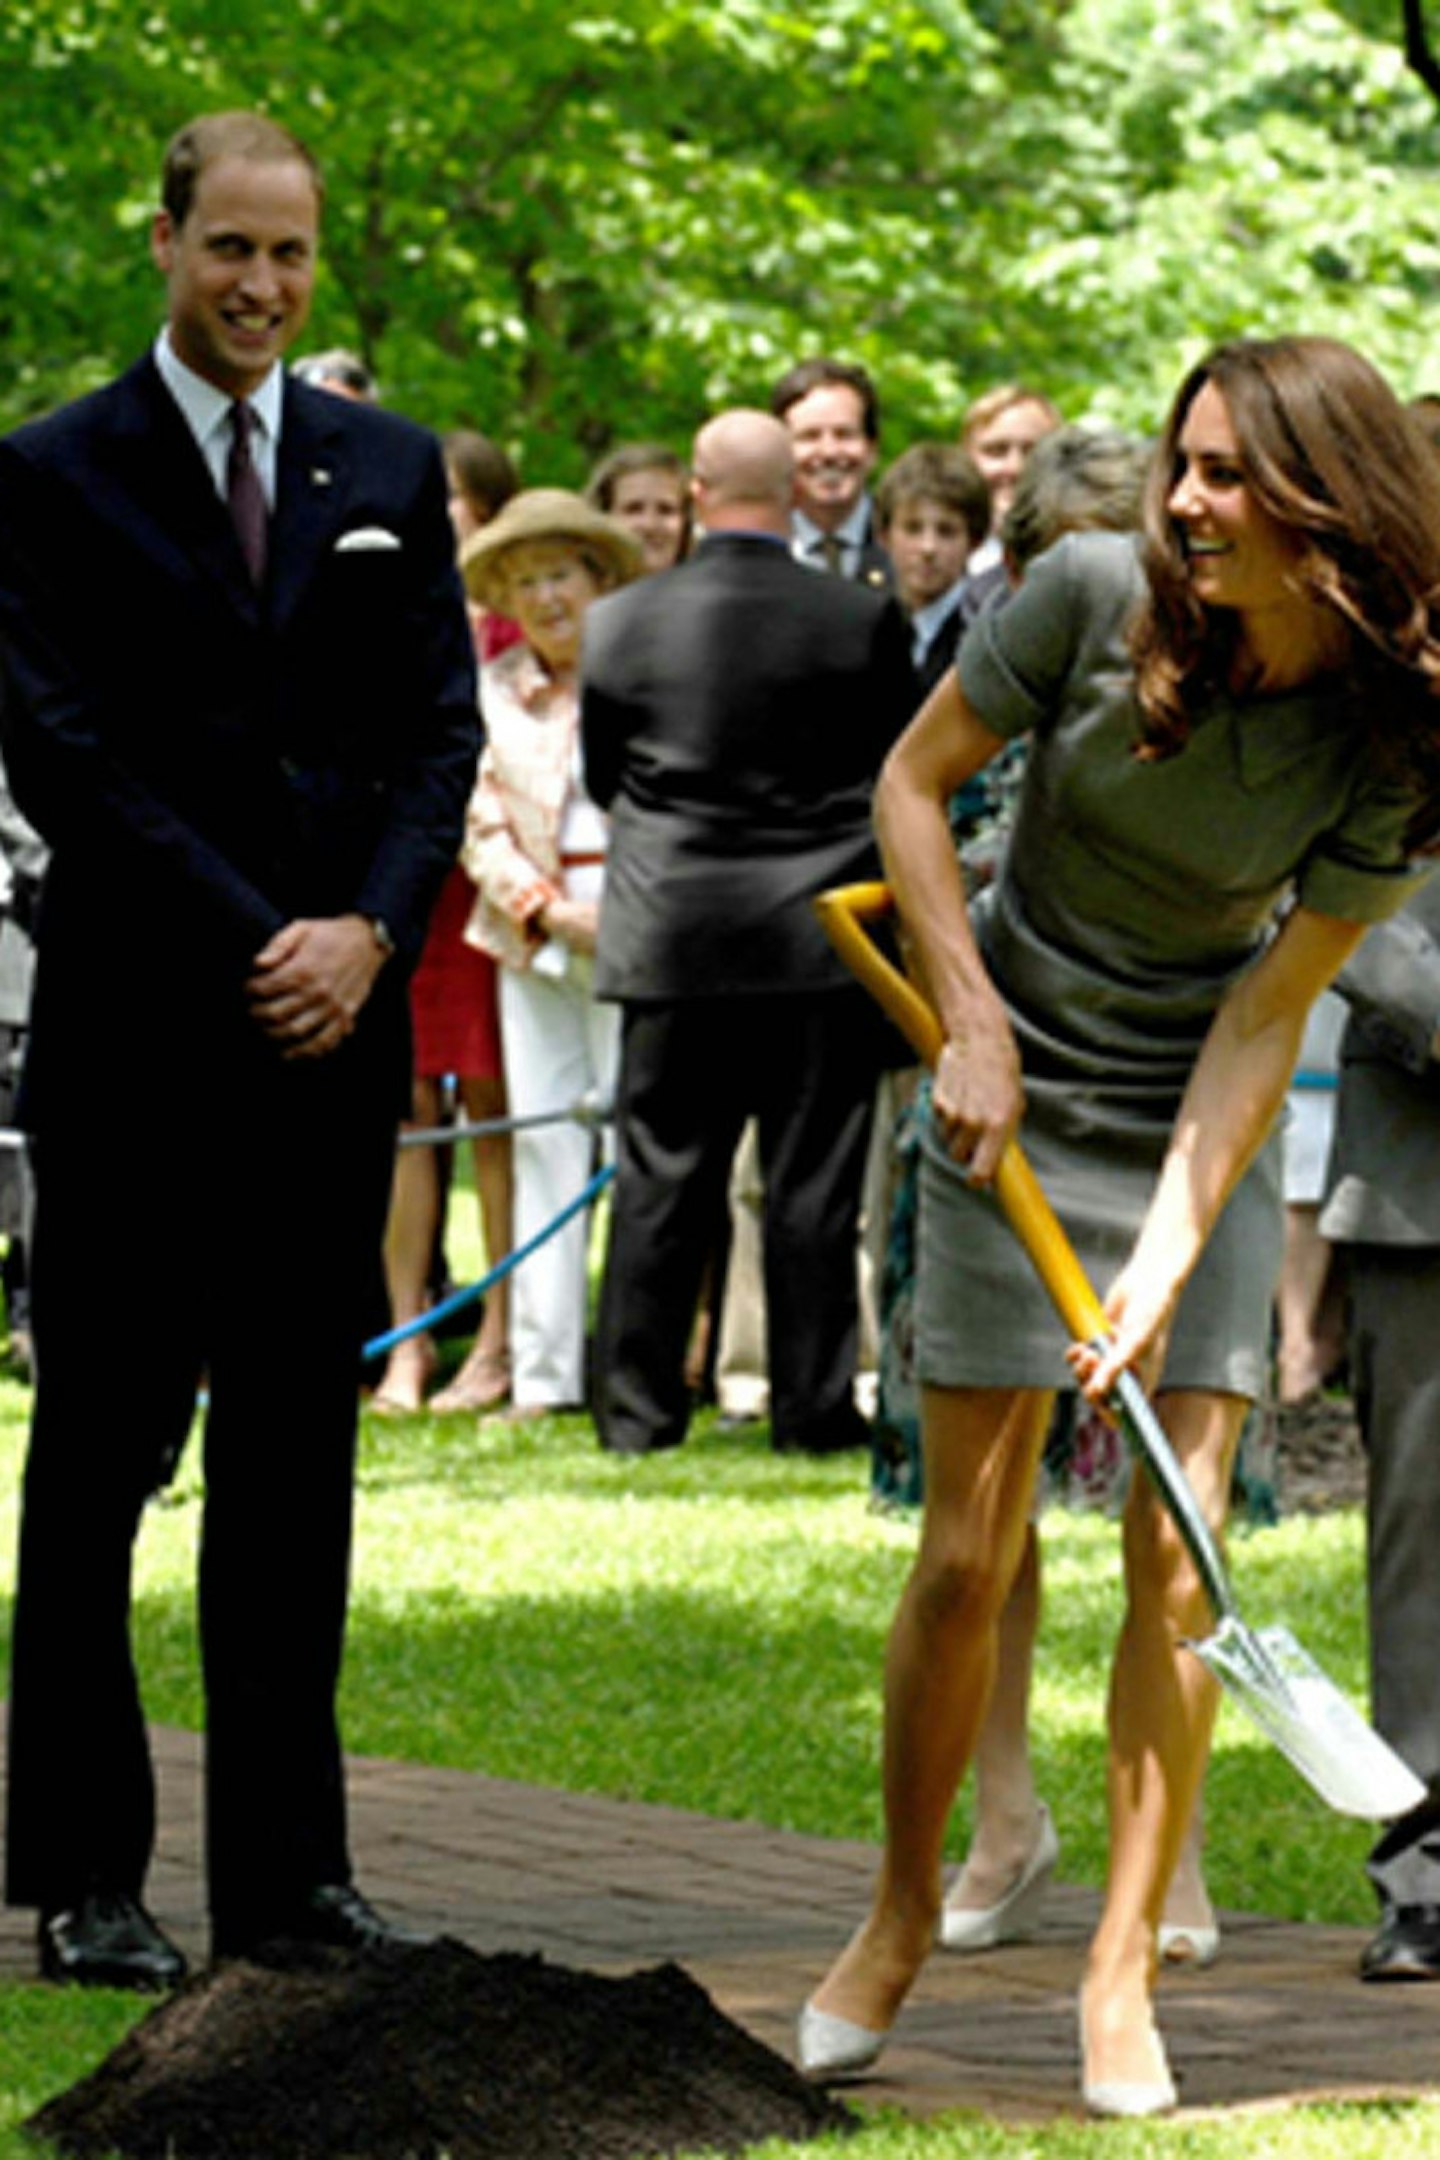 12-11. Planting a tree while dressed in their finest in July 2011